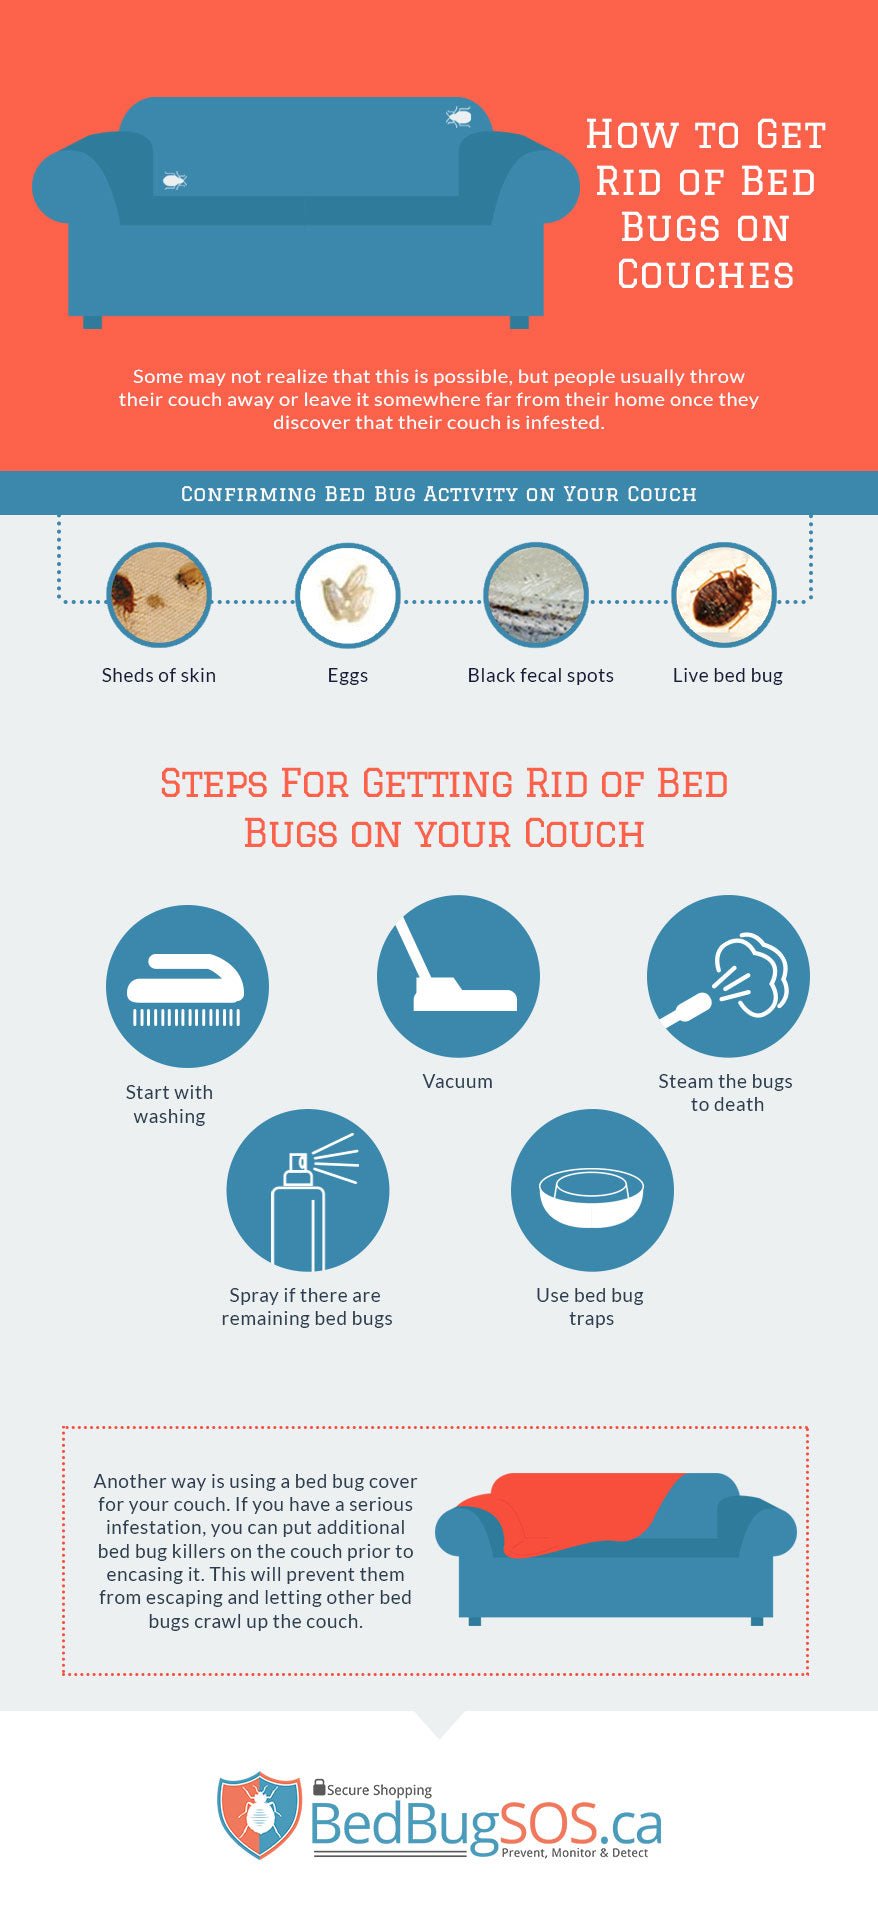 How to Get Rid of Bed Bugs from Furniture?